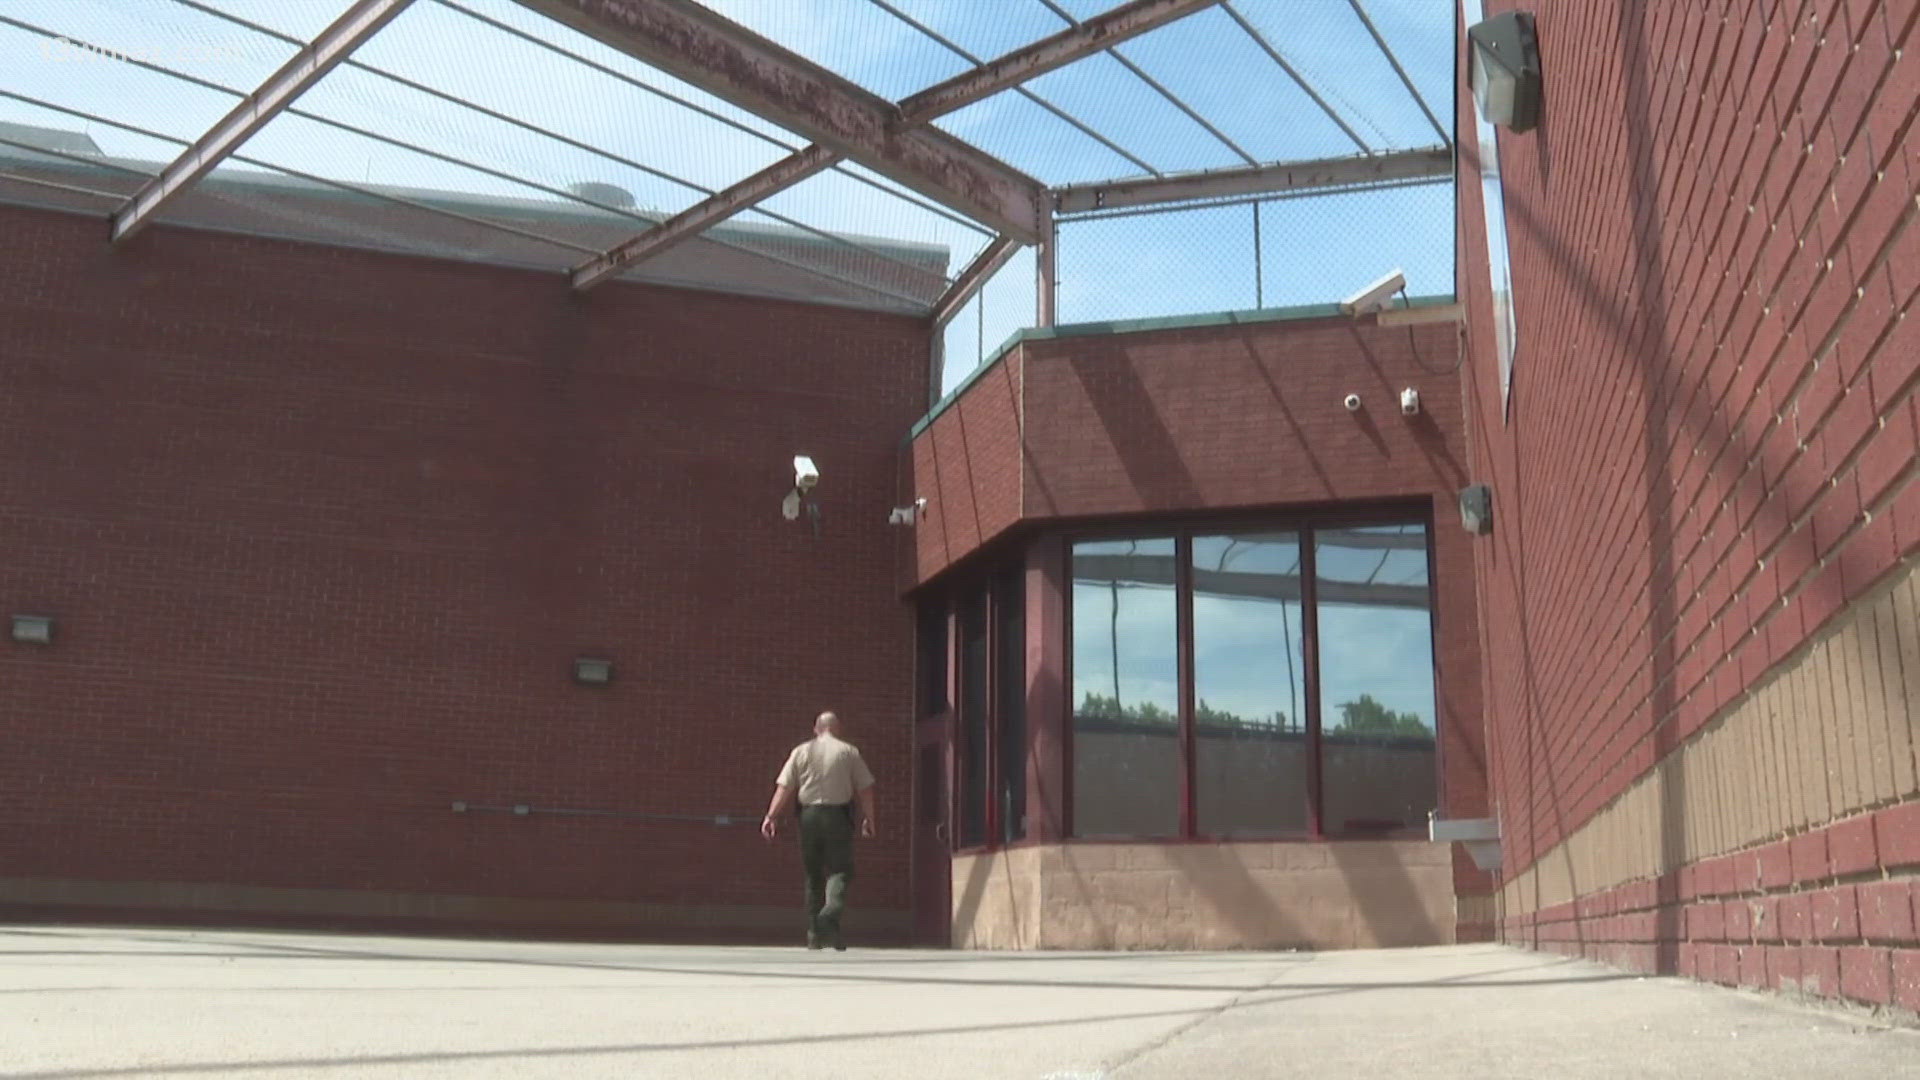 Sheriff Brad Freeman said the Monroe County Jail needs more beds and holding cells. He hopes the project can be funded through the county SPLOST.